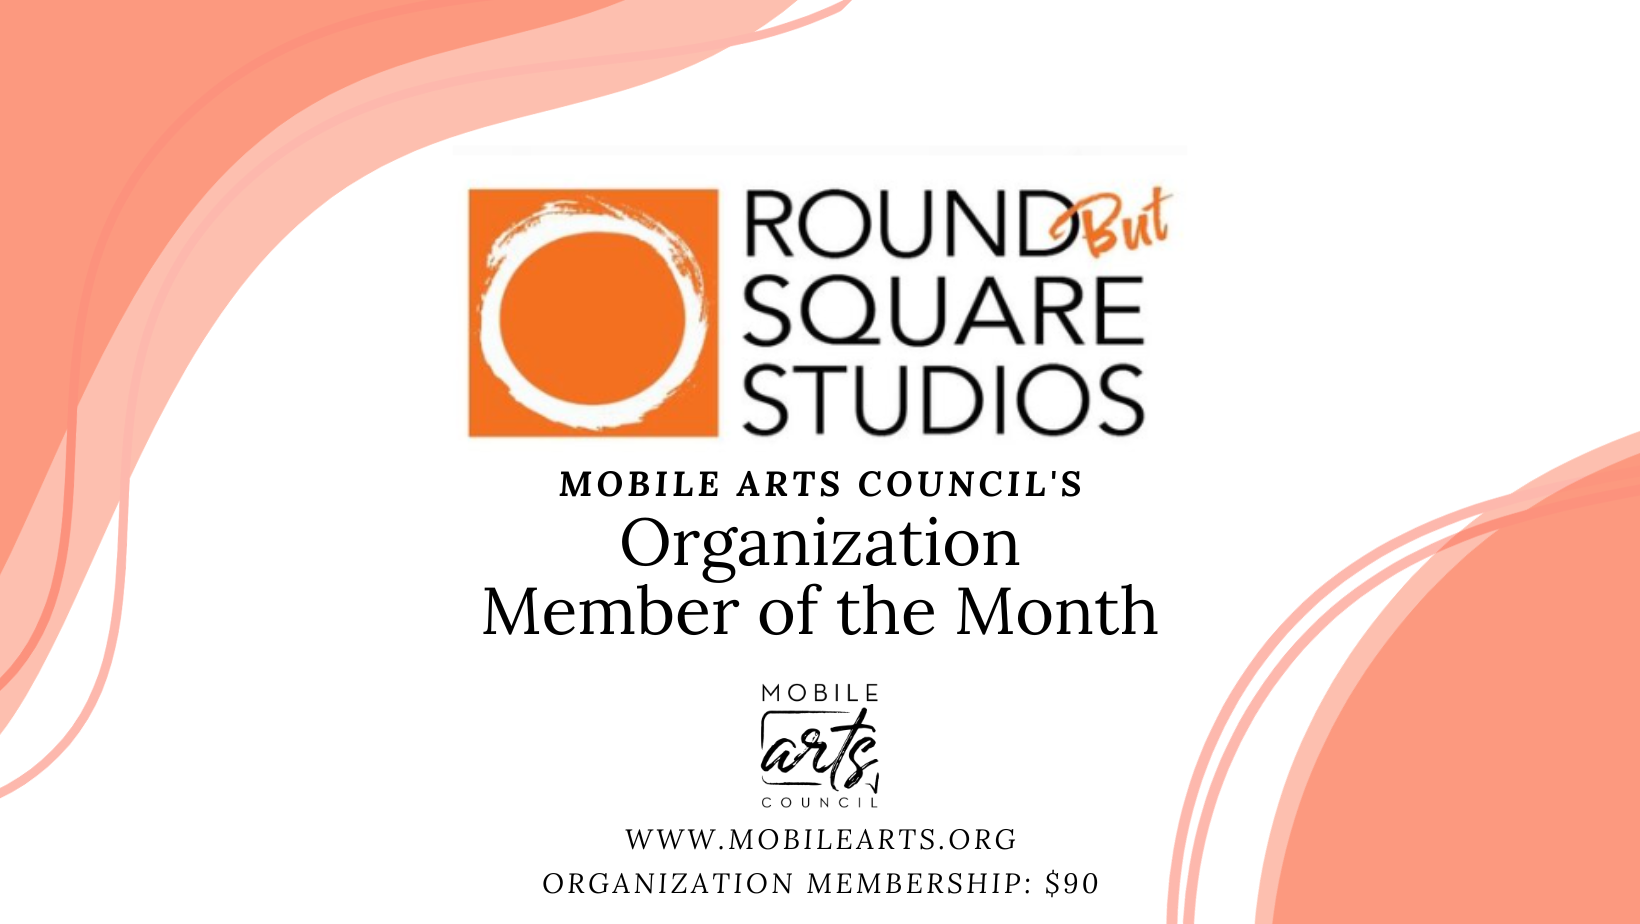 ROUND But SQUARE STUDIOS MOBILE ARTS COUNCIL'S Organization Member of the Month MOBILE arts, COUNCIL WWW.MOBILEARTS.ORG ORGANIZATION MEMBERSHIP: $90